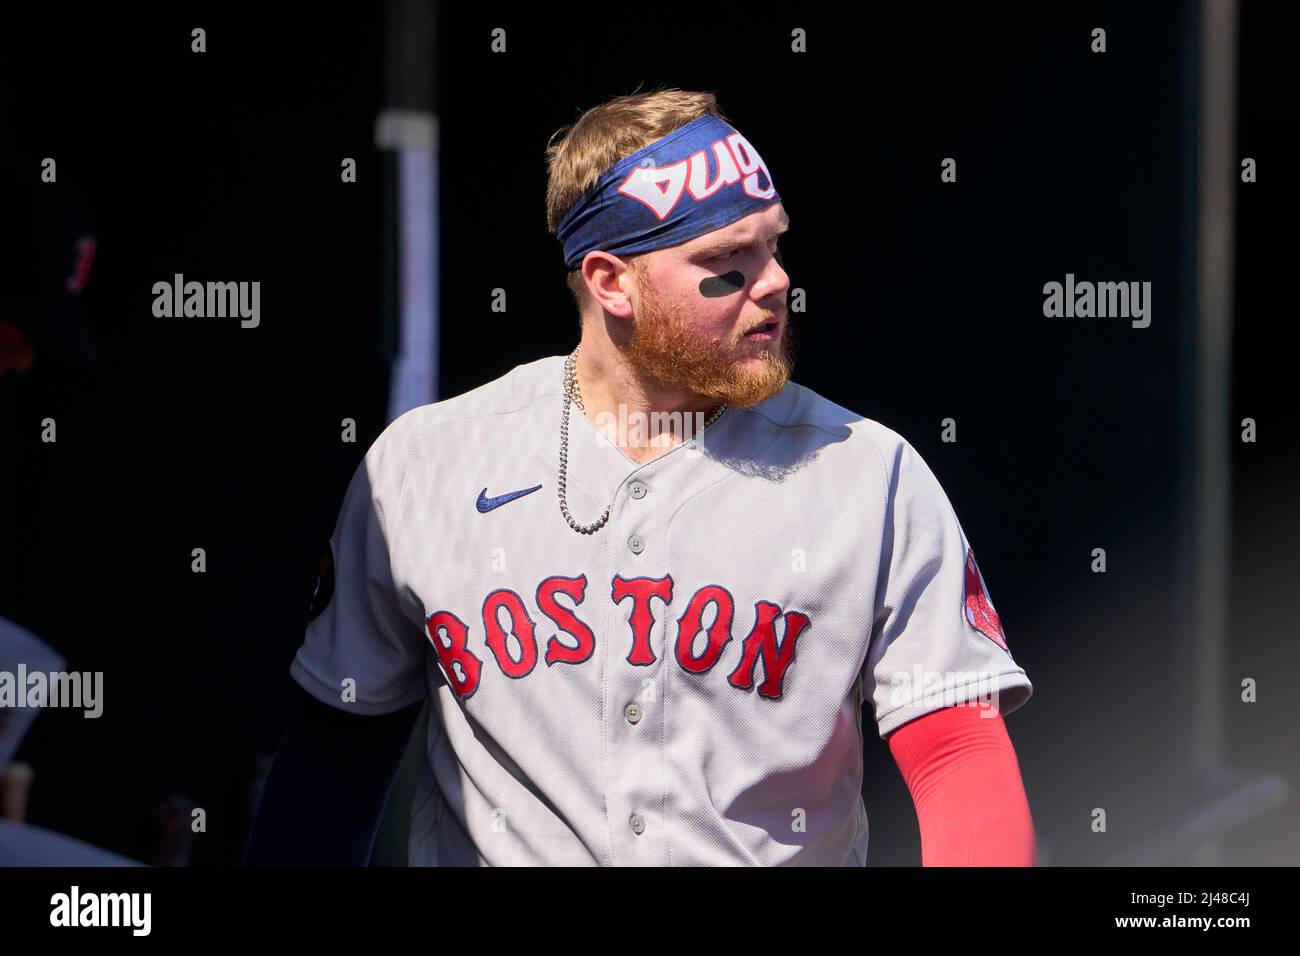 Detroit MI, USA. 12th Apr, 2022. Boston left fielder Alex Verdugo (99) watches the action during the game with Boston Red Sox and Detroit Tigers held at Comercia Park in Detroit Mi. David Seelig/Cal Sport Medi. Credit: csm/Alamy Live News Stock Photo